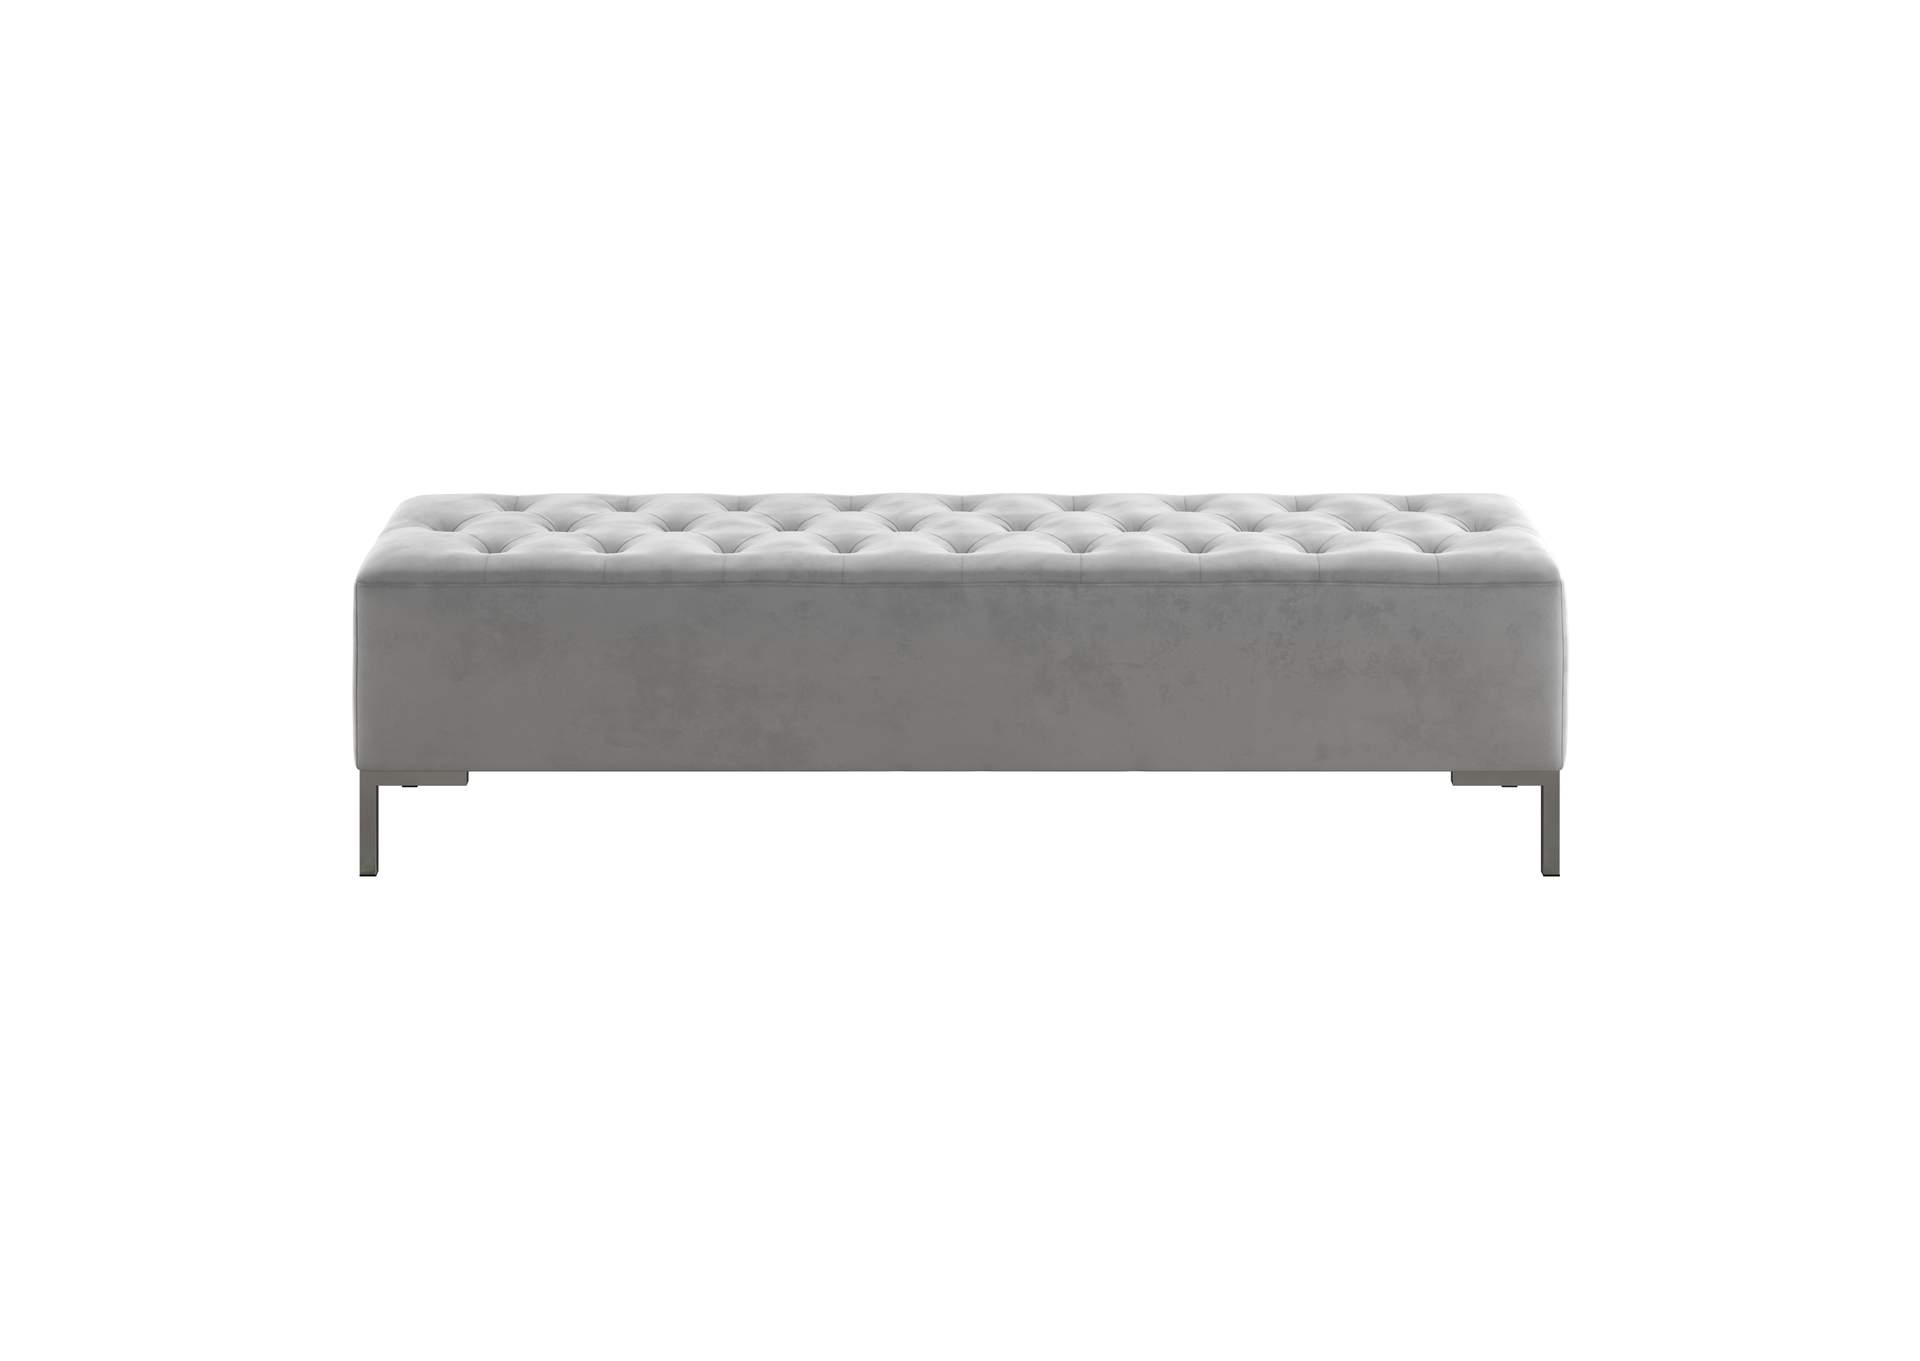 Lacey Upholstered Bench,Emerald Home Furnishings